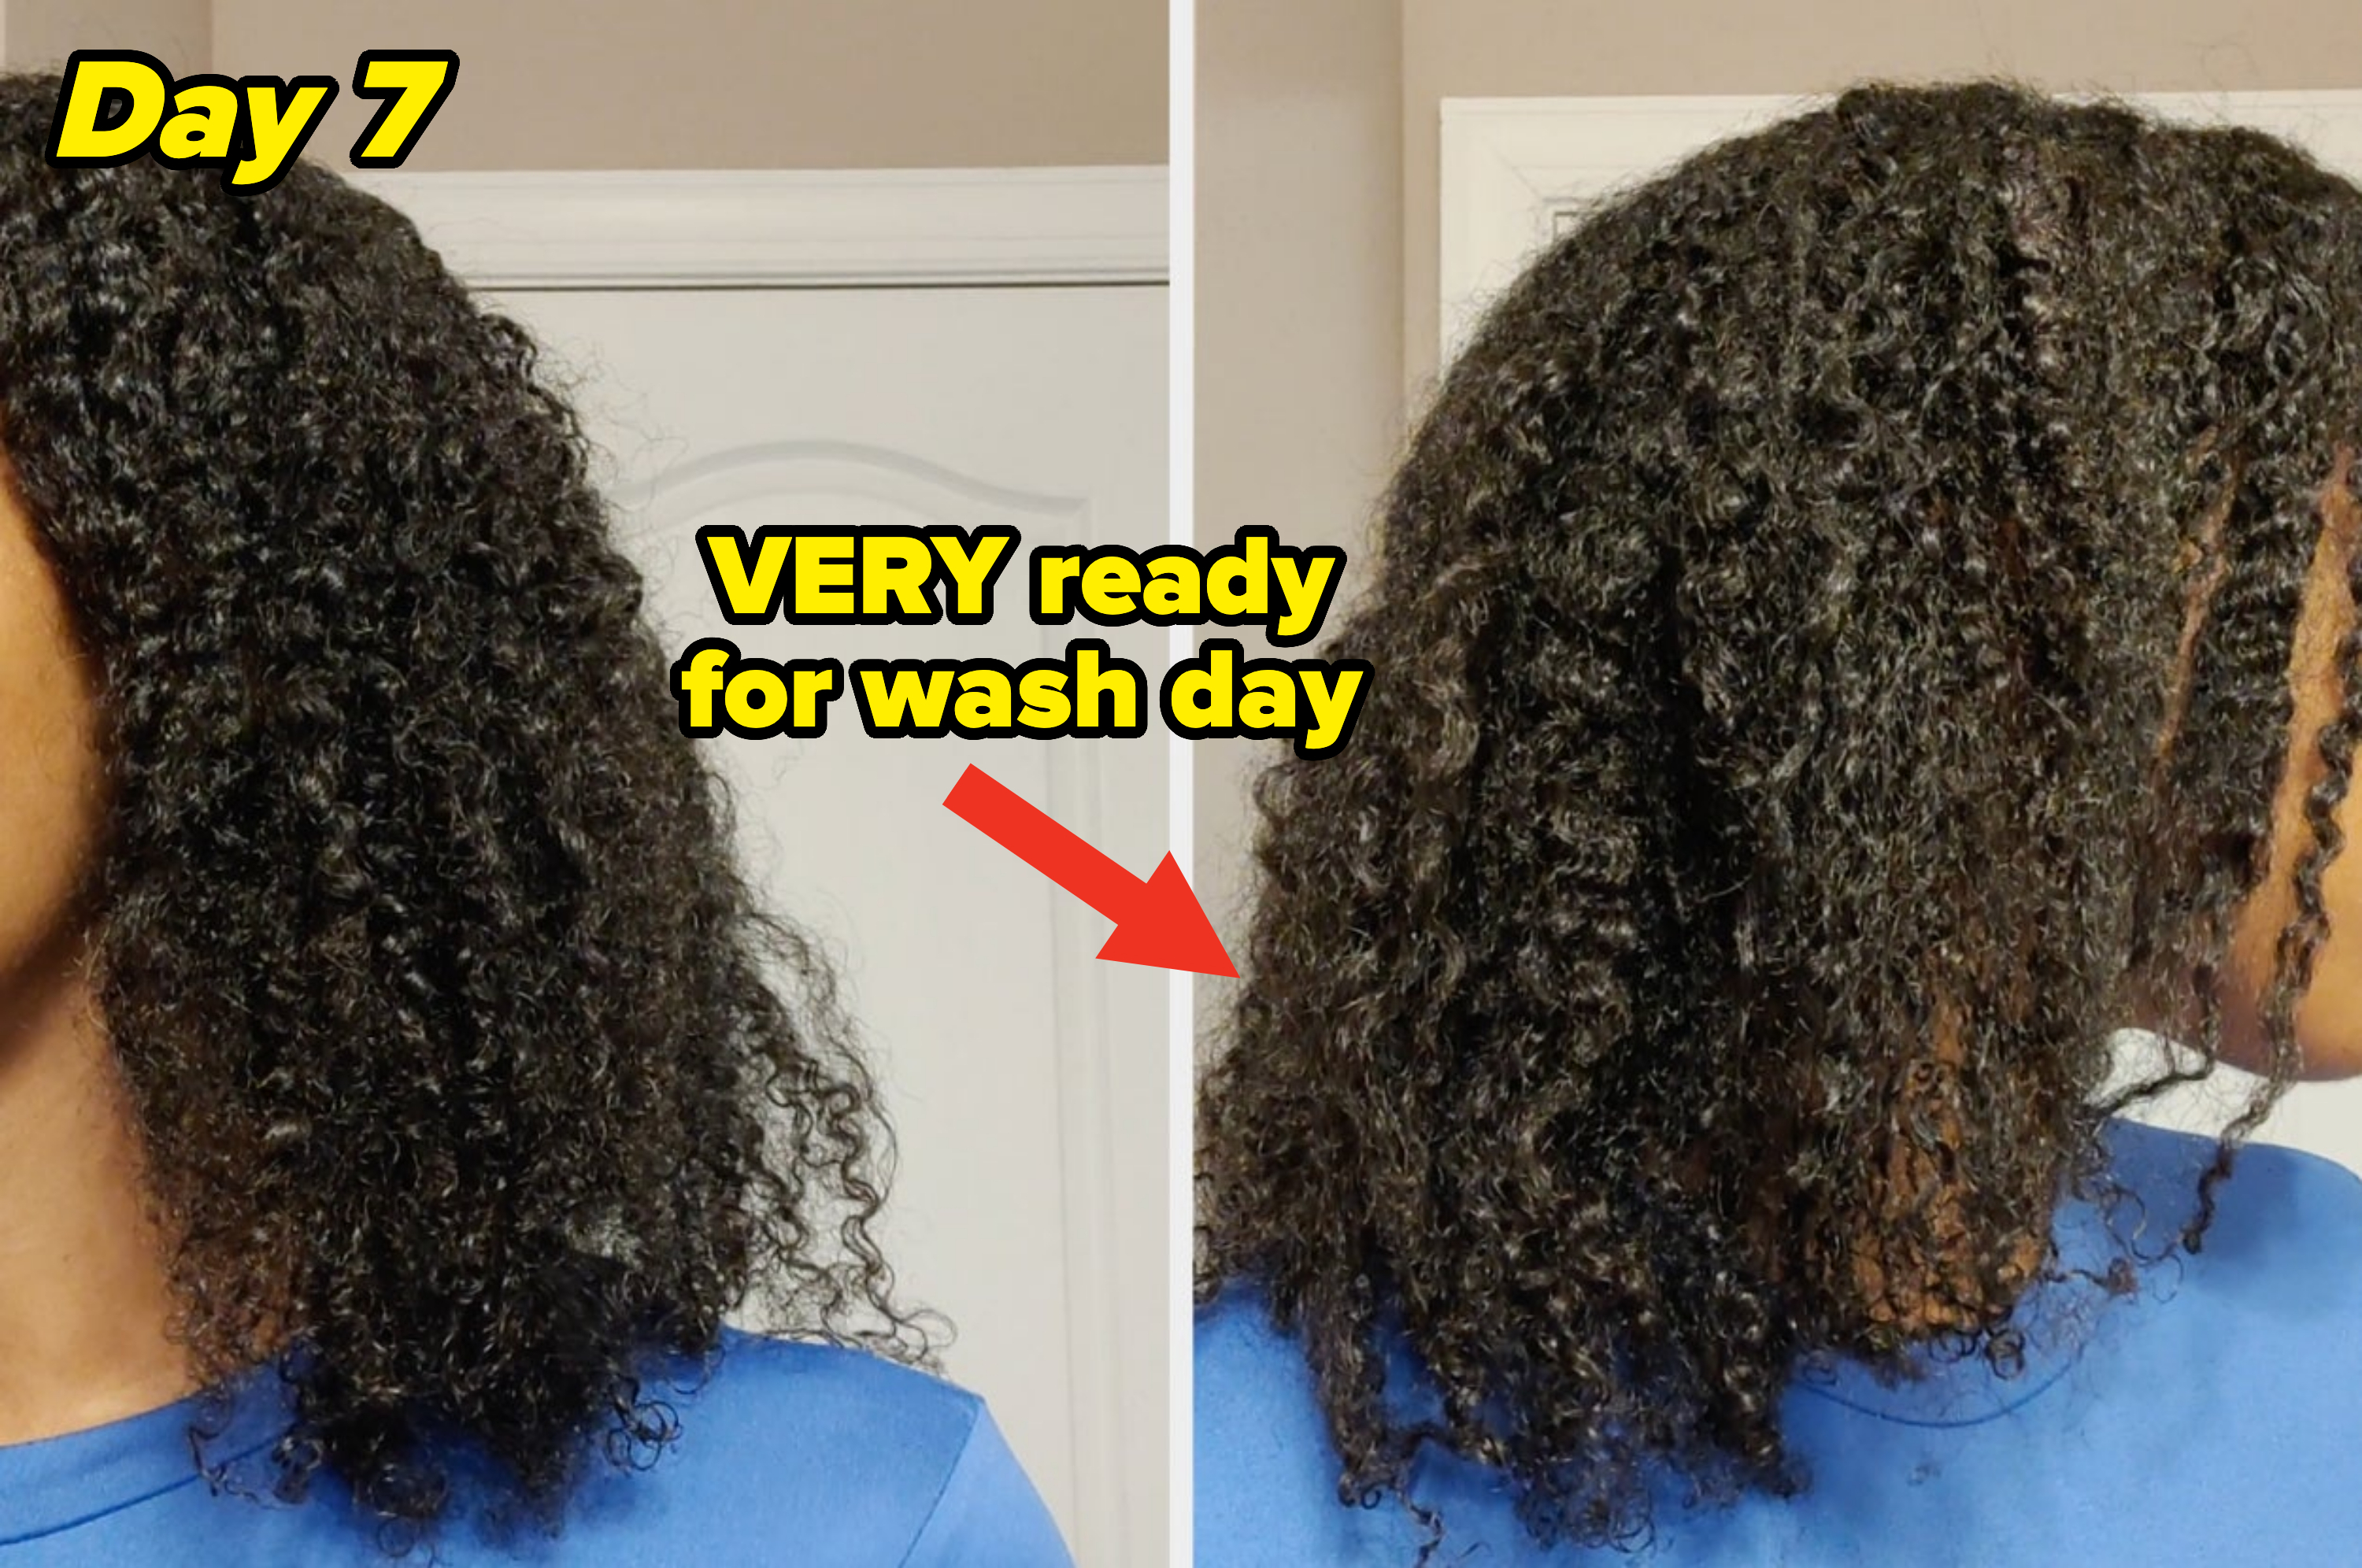 Person with shoulder-length curly hair before and after applying hair product